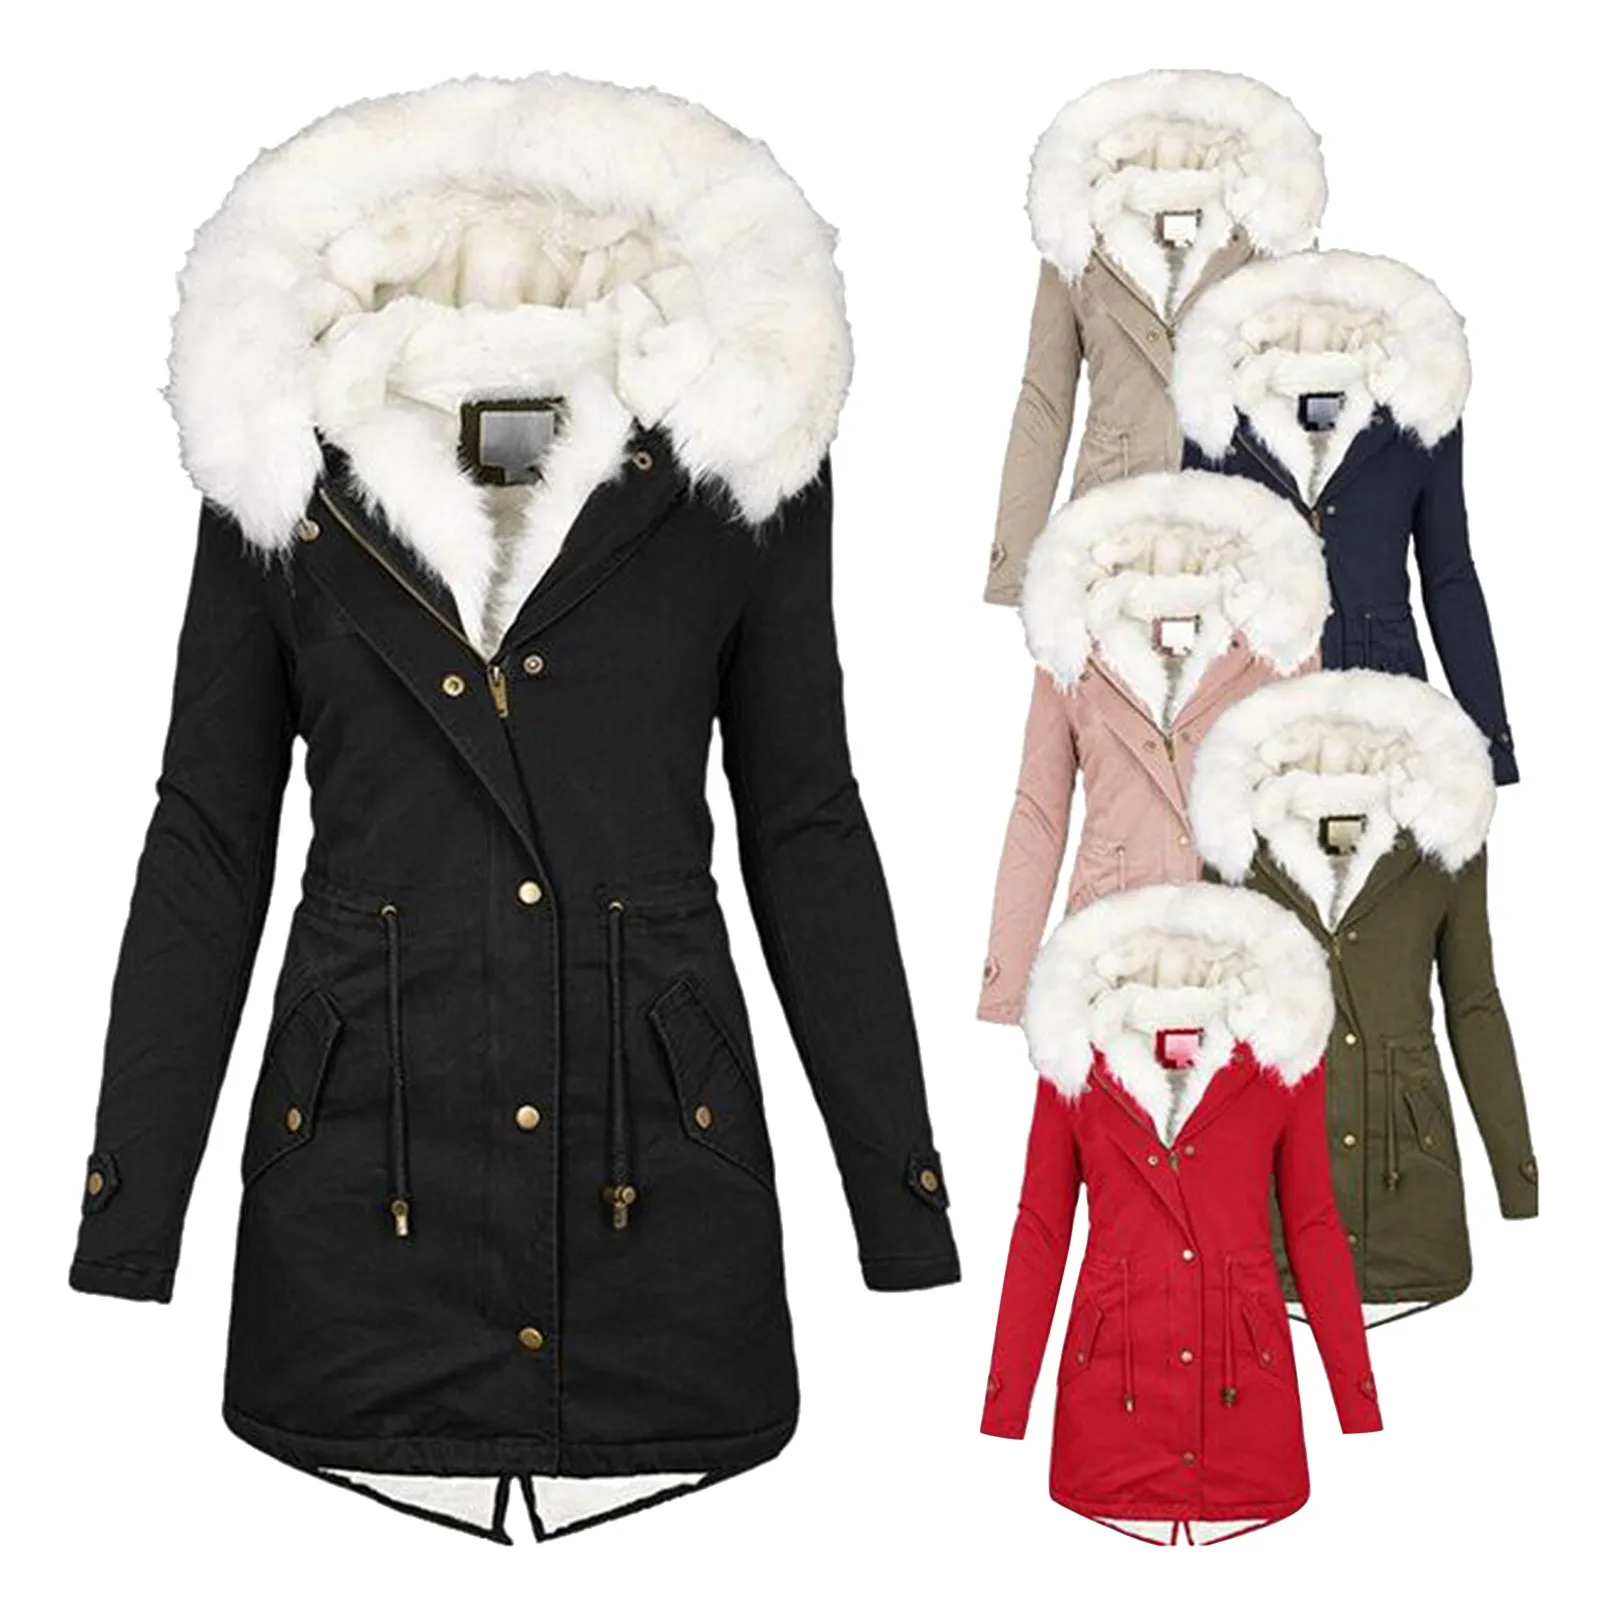 New winter women jacket medium-long thicken plus size 5XL outwear hooded wadded coat slim parka cotton-padded jacket overcoat customized leather id nameplate dog collar soft padded dogs collars free engraving name for small medium large dogs adjustable